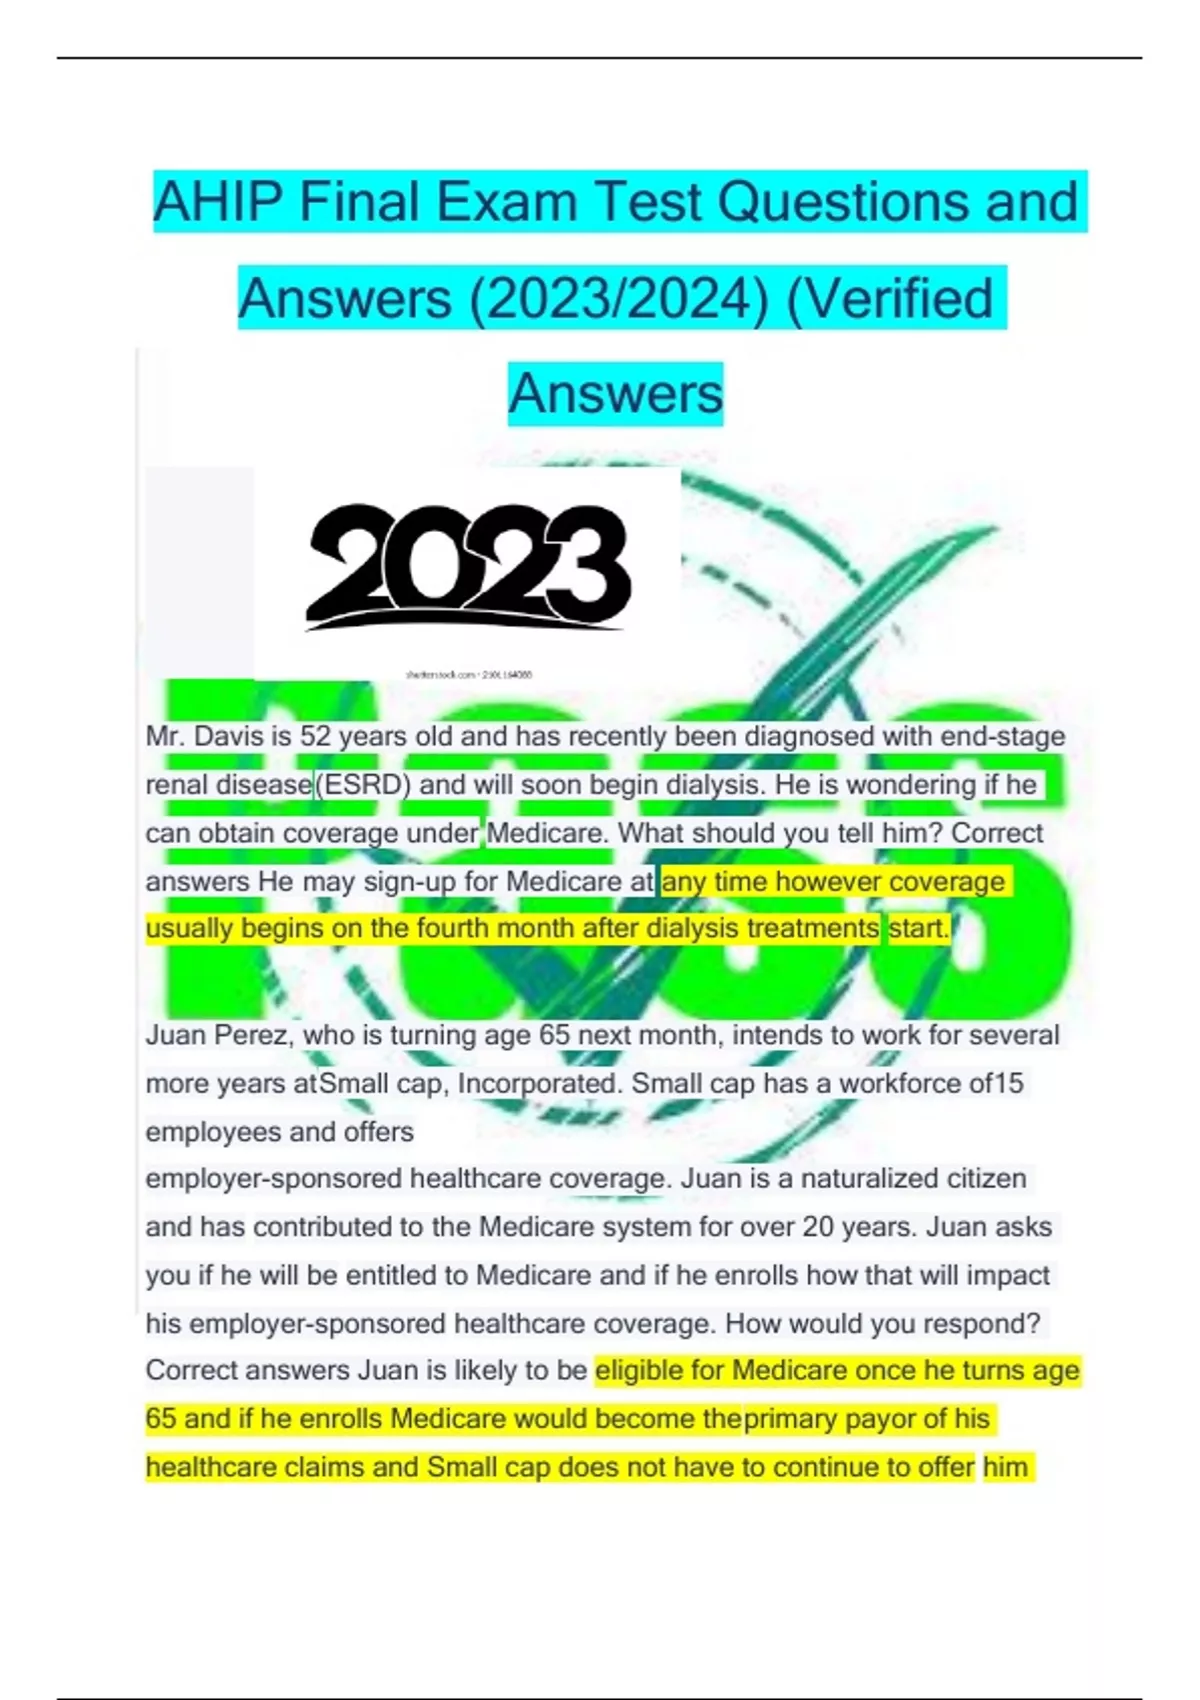 AHIP Final Exam Test Questions and Answers (2023/2024) (Verified